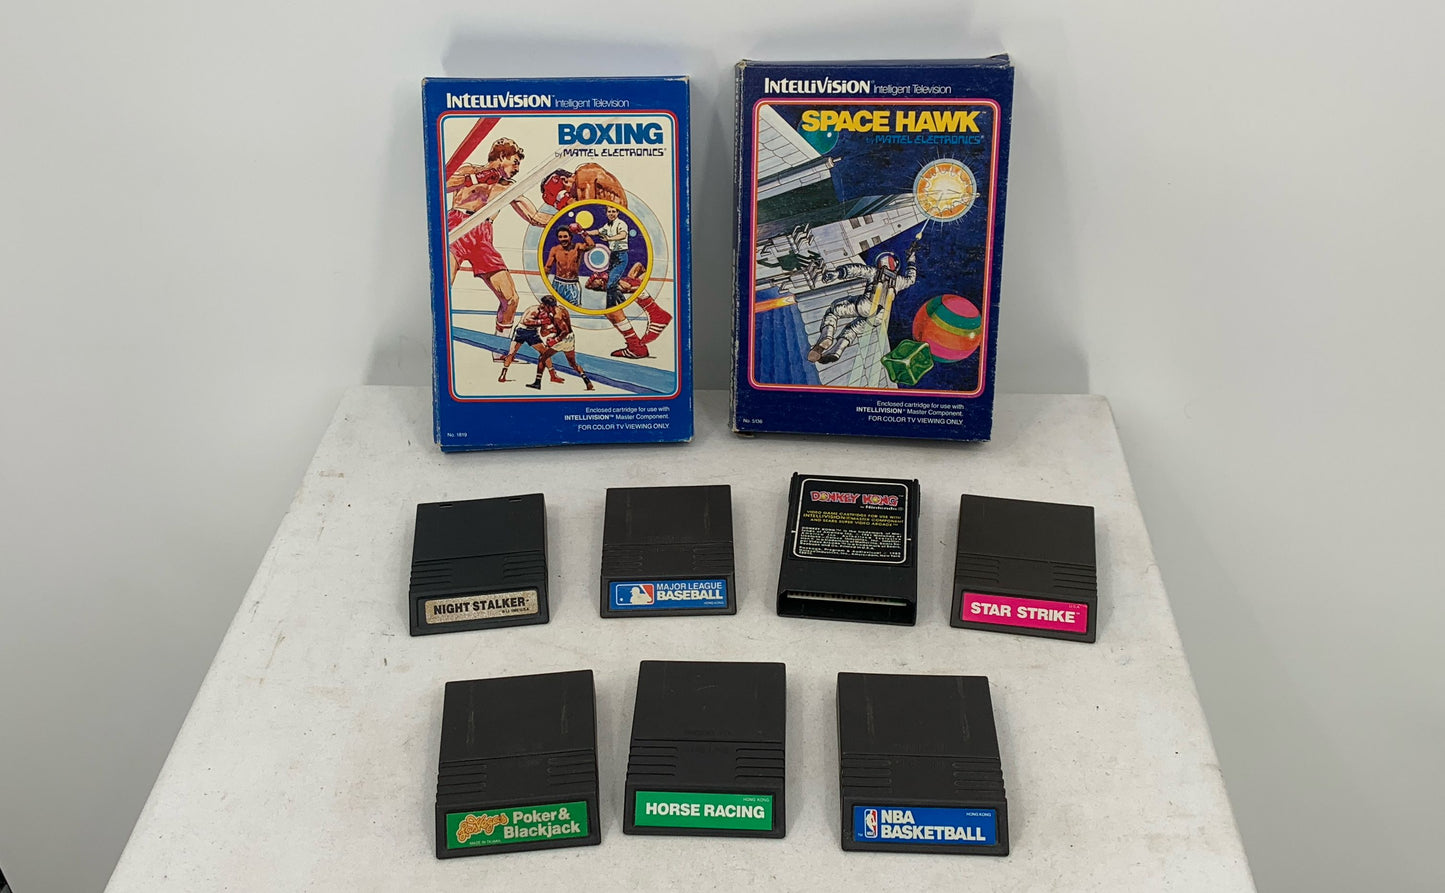 Intellivision Lot Of 8 Vintage Video Game Cartridges By Mattel/Coleco